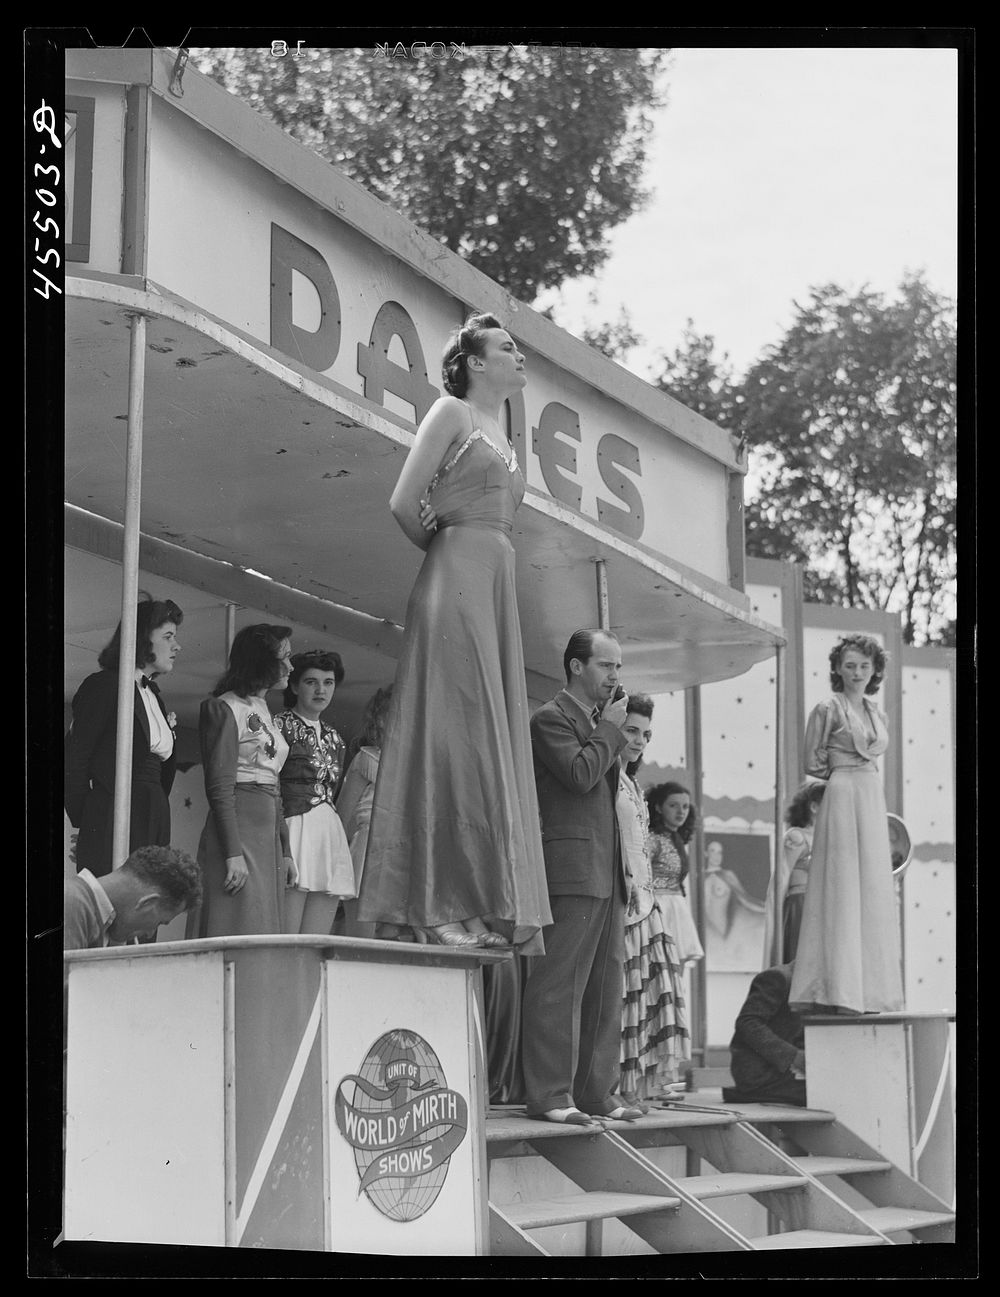 [Untitled photo, possibly related to: The "girlie" show at the Rutland Fair, Vermont]. Sourced from the Library of Congress.